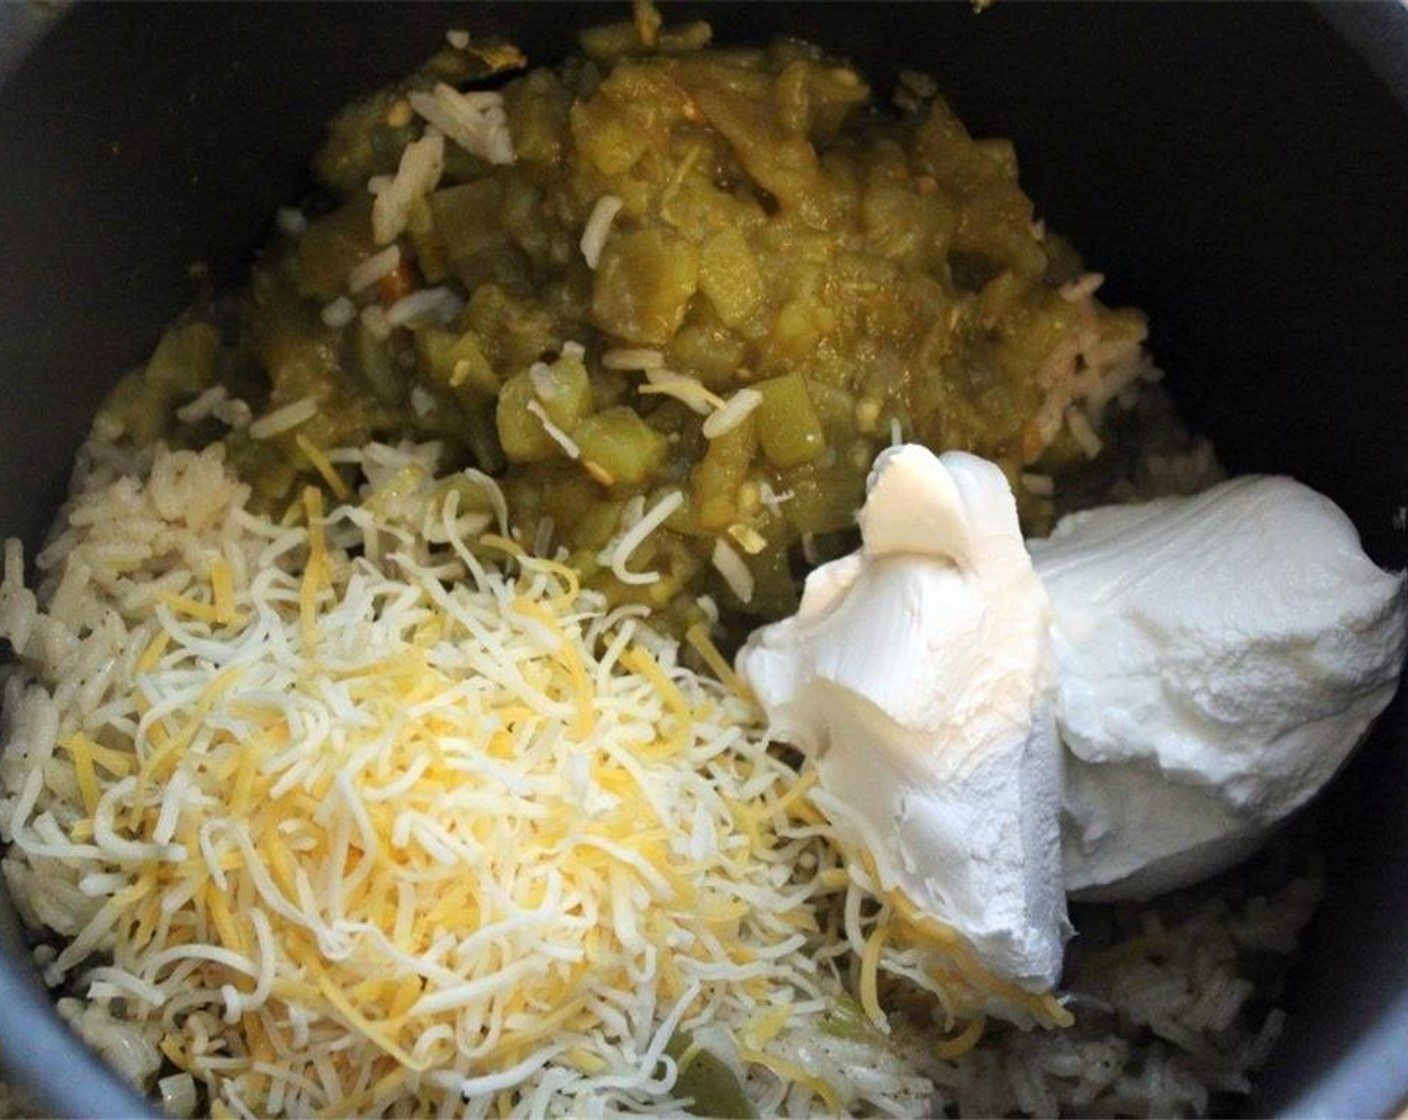 step 9 Now add the Diced Green Chiles (1 can), half the Shredded Cheese (1/2 cup), Sour Cream (1/4 cup), and Philadelphia Original Soft Cheese (2 Tbsp) to the pot.